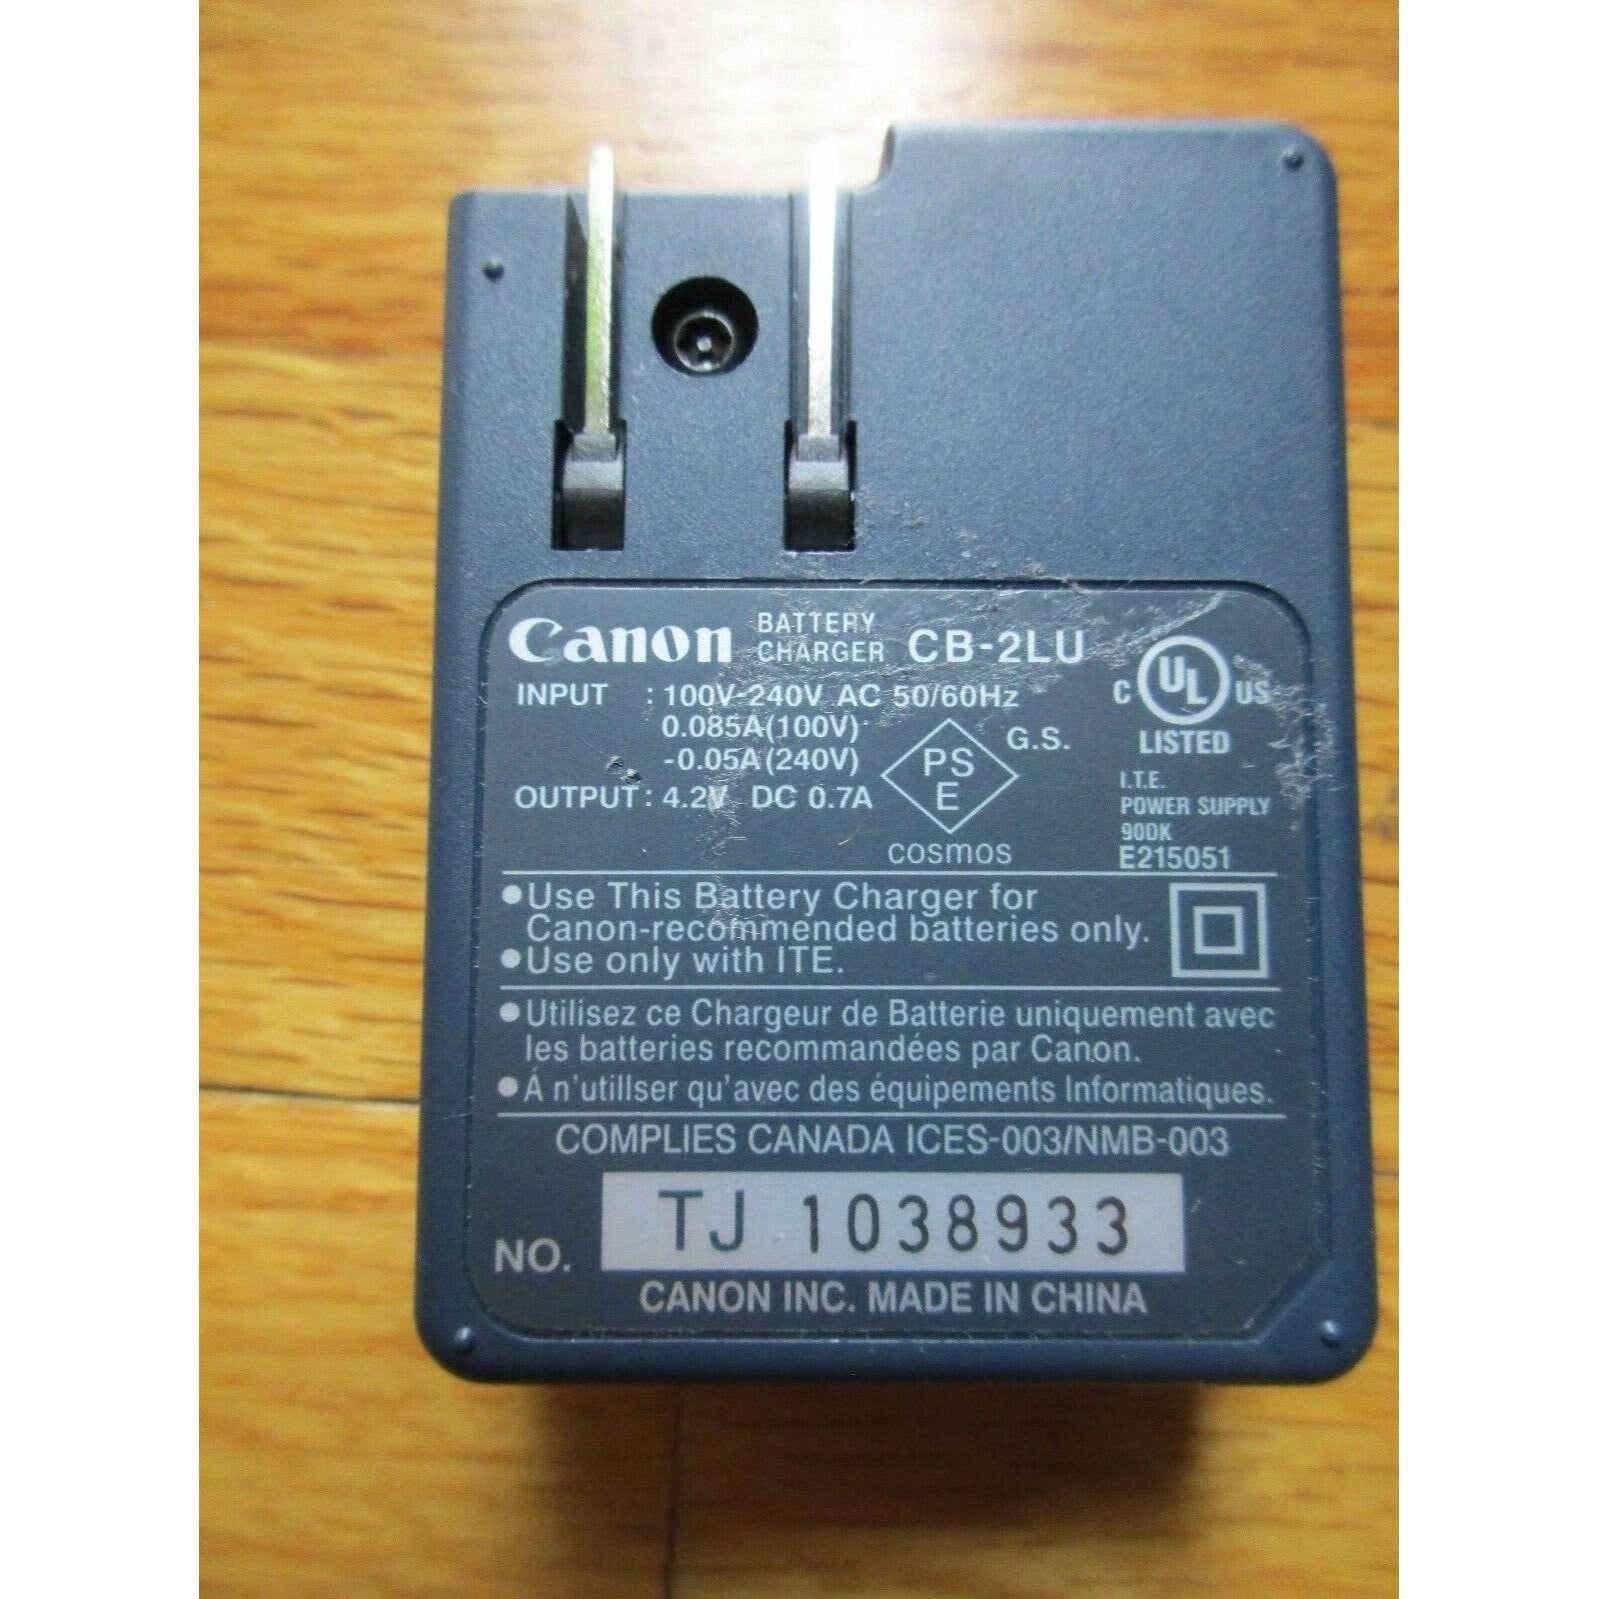 Canon CB-2LU Battery Charger